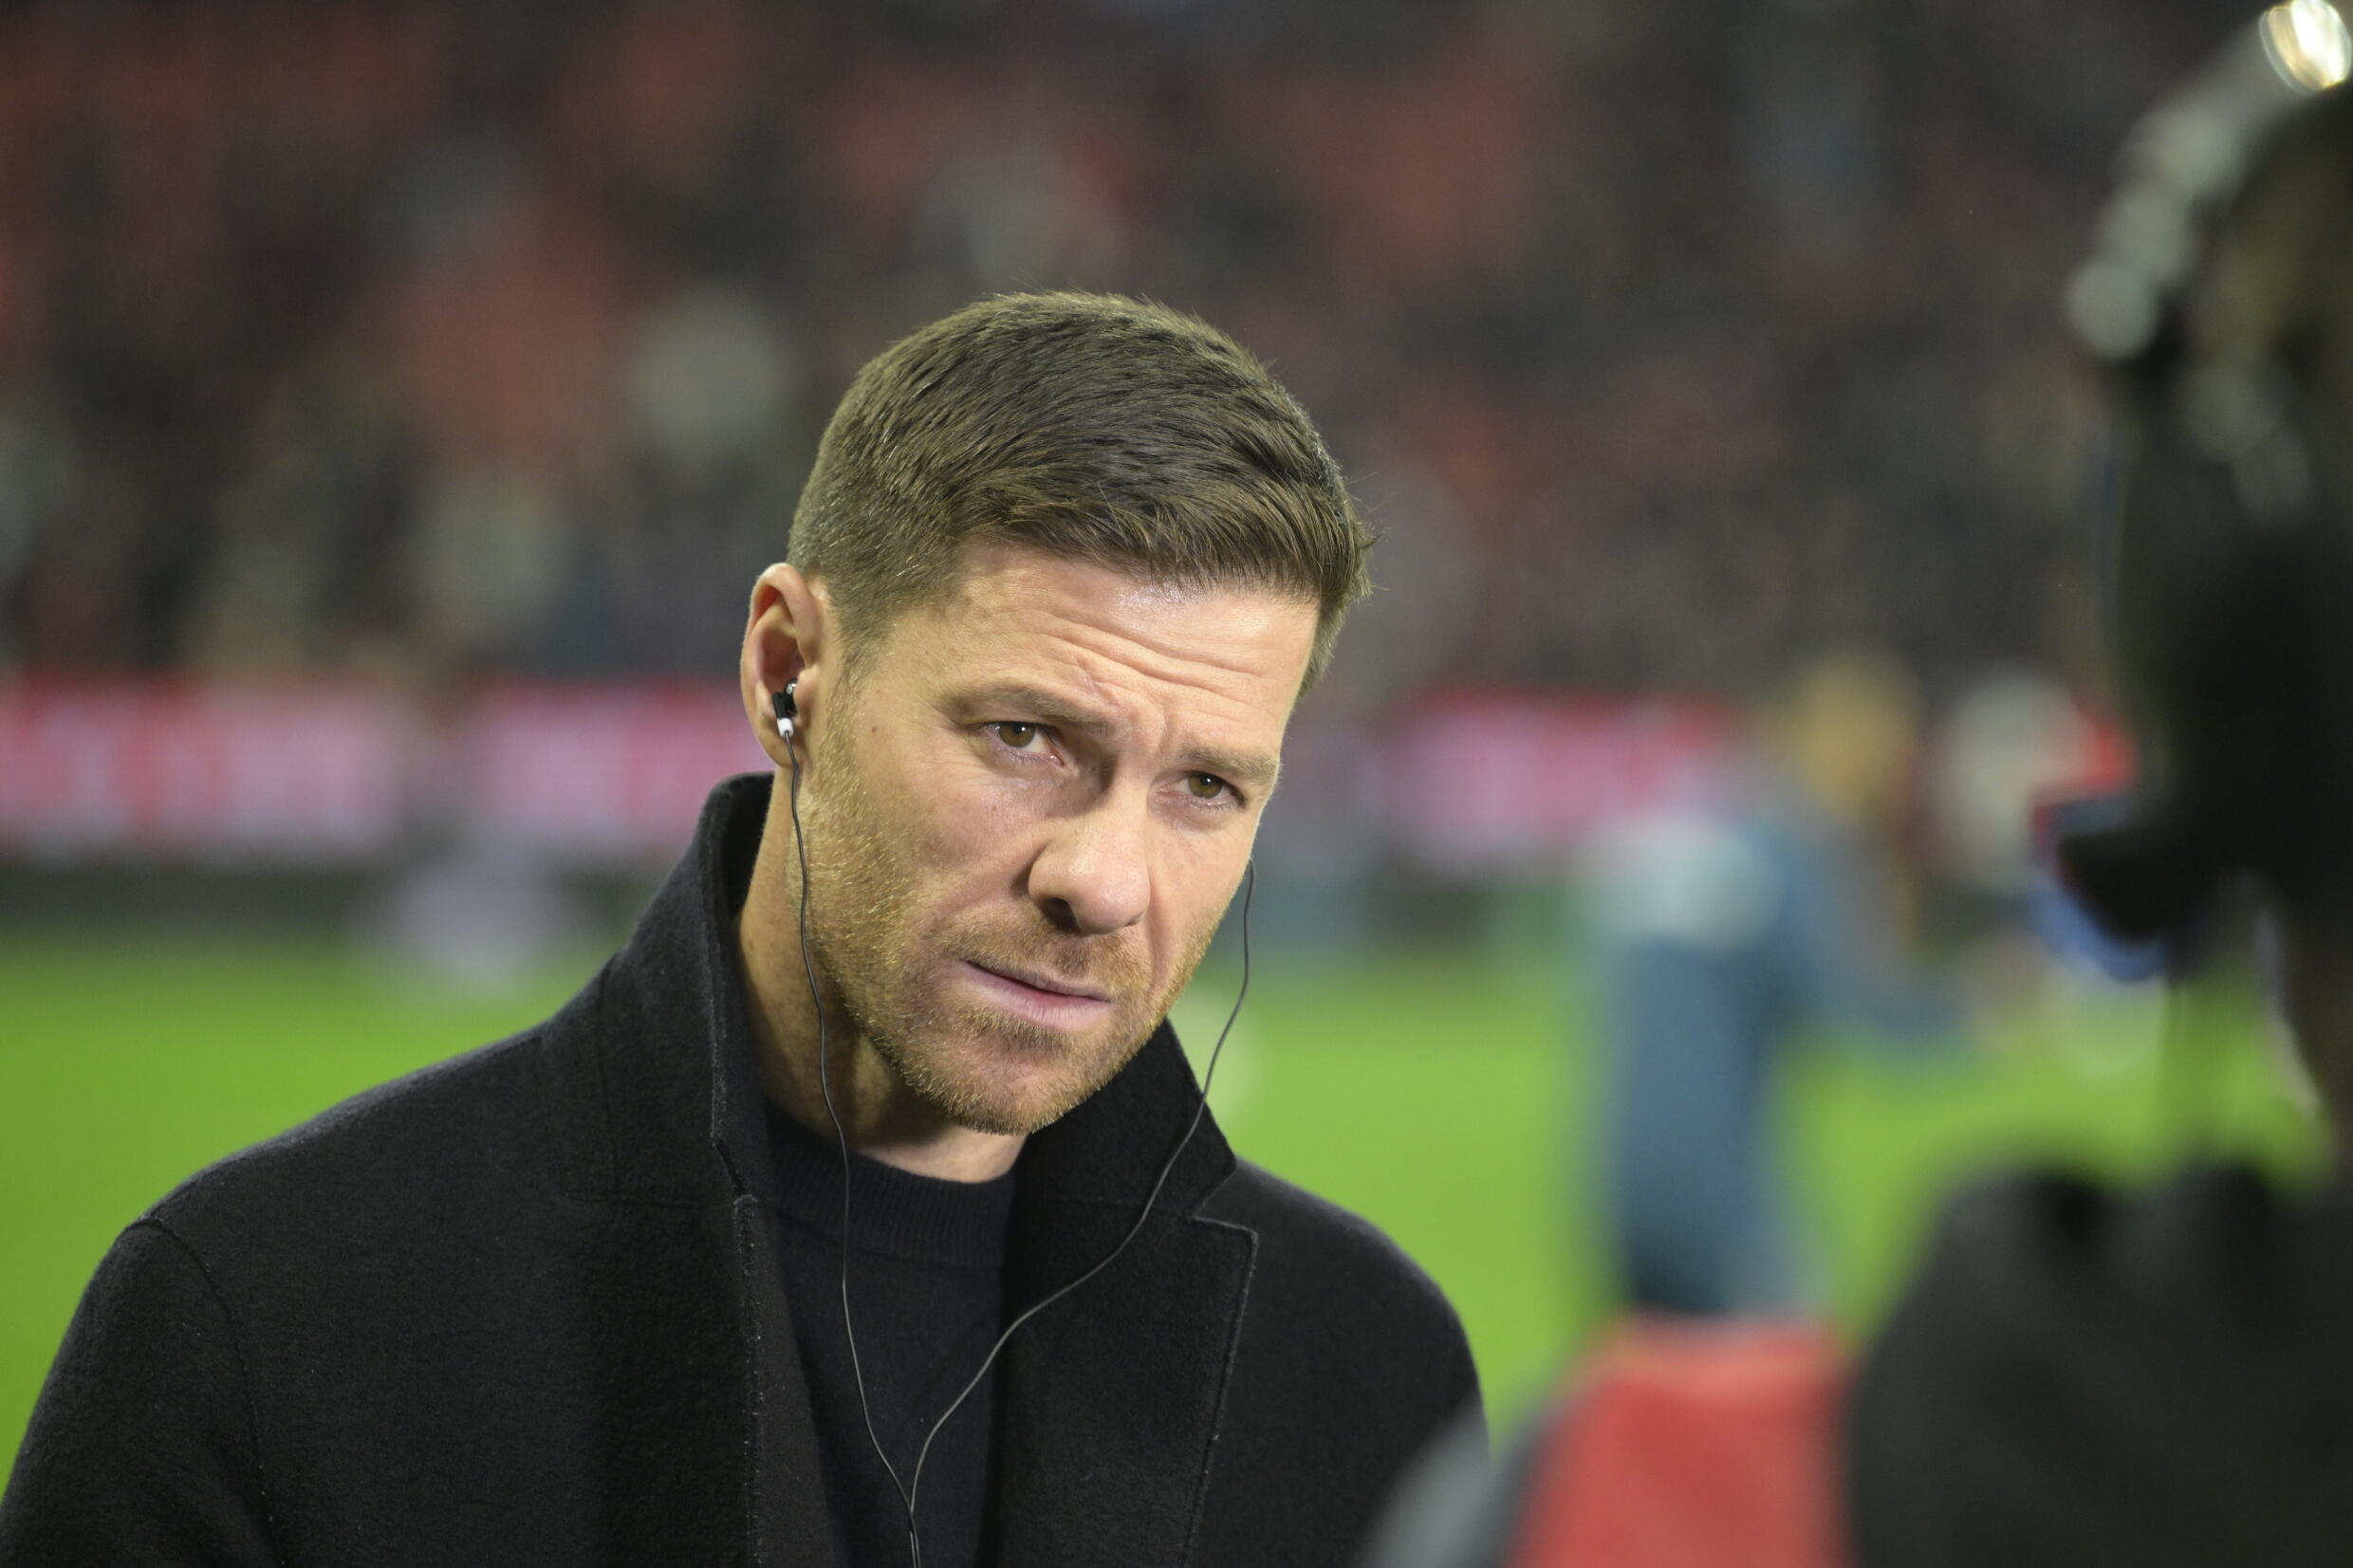 Xabi Alonso, the Spanish coach of the German football club Bayer Leverkusen, who is said to be tipped to replace Bayern Munich coach Thomas Tuchel who will leave his post in the summer of 2024, before the German football championship match against Bayern Munich in Leverkusen on February 10, 2024.